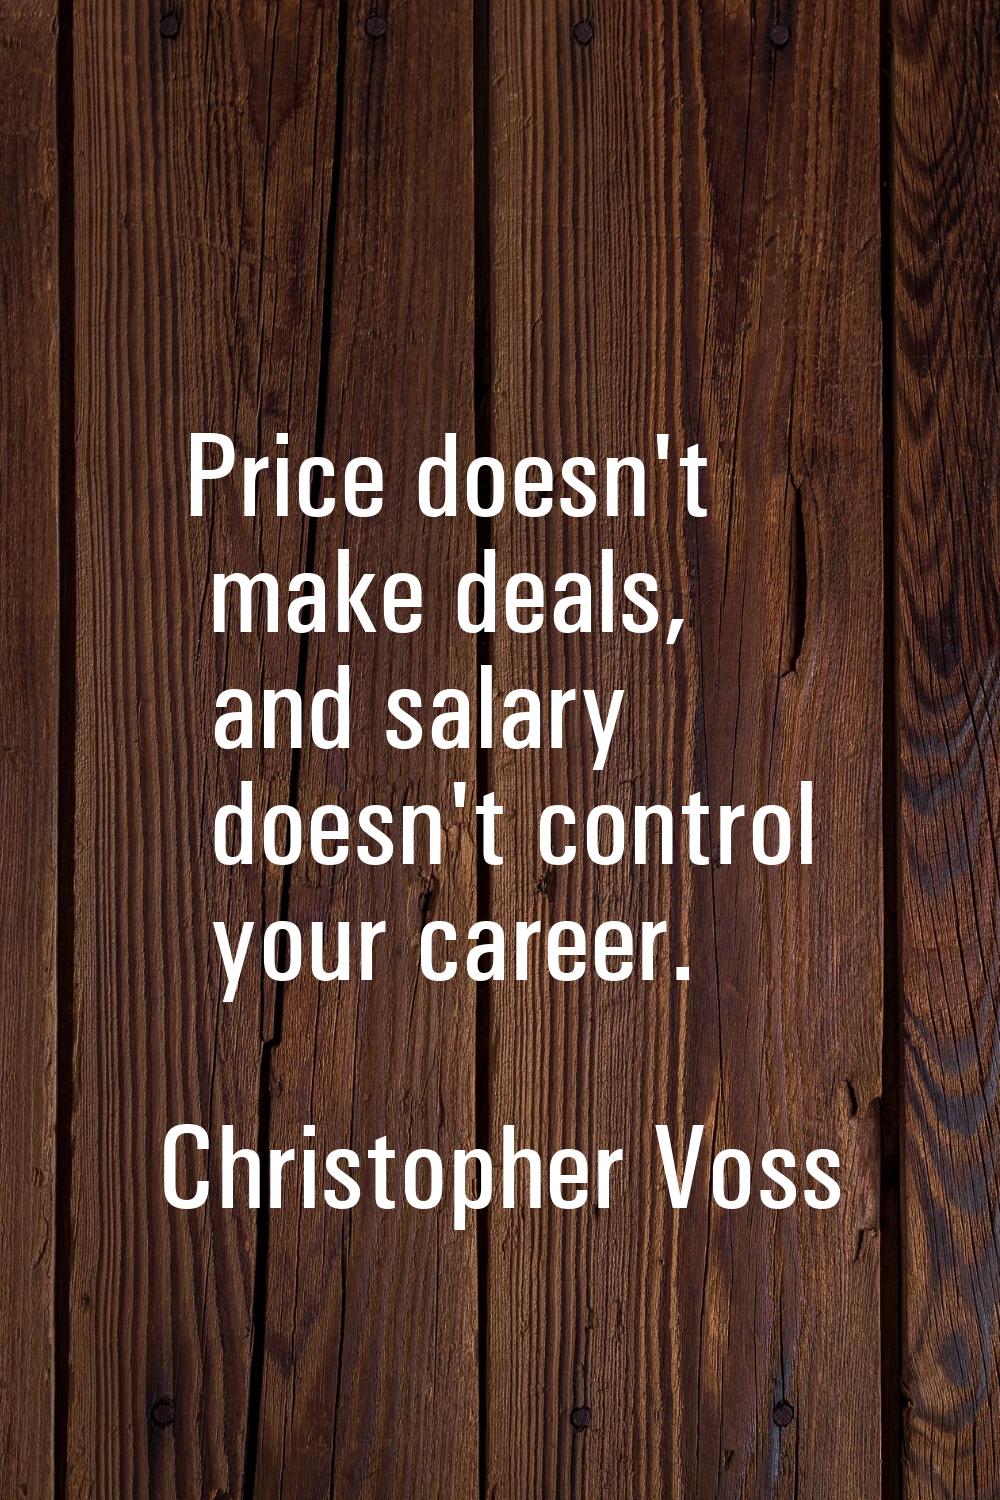 Price doesn't make deals, and salary doesn't control your career.